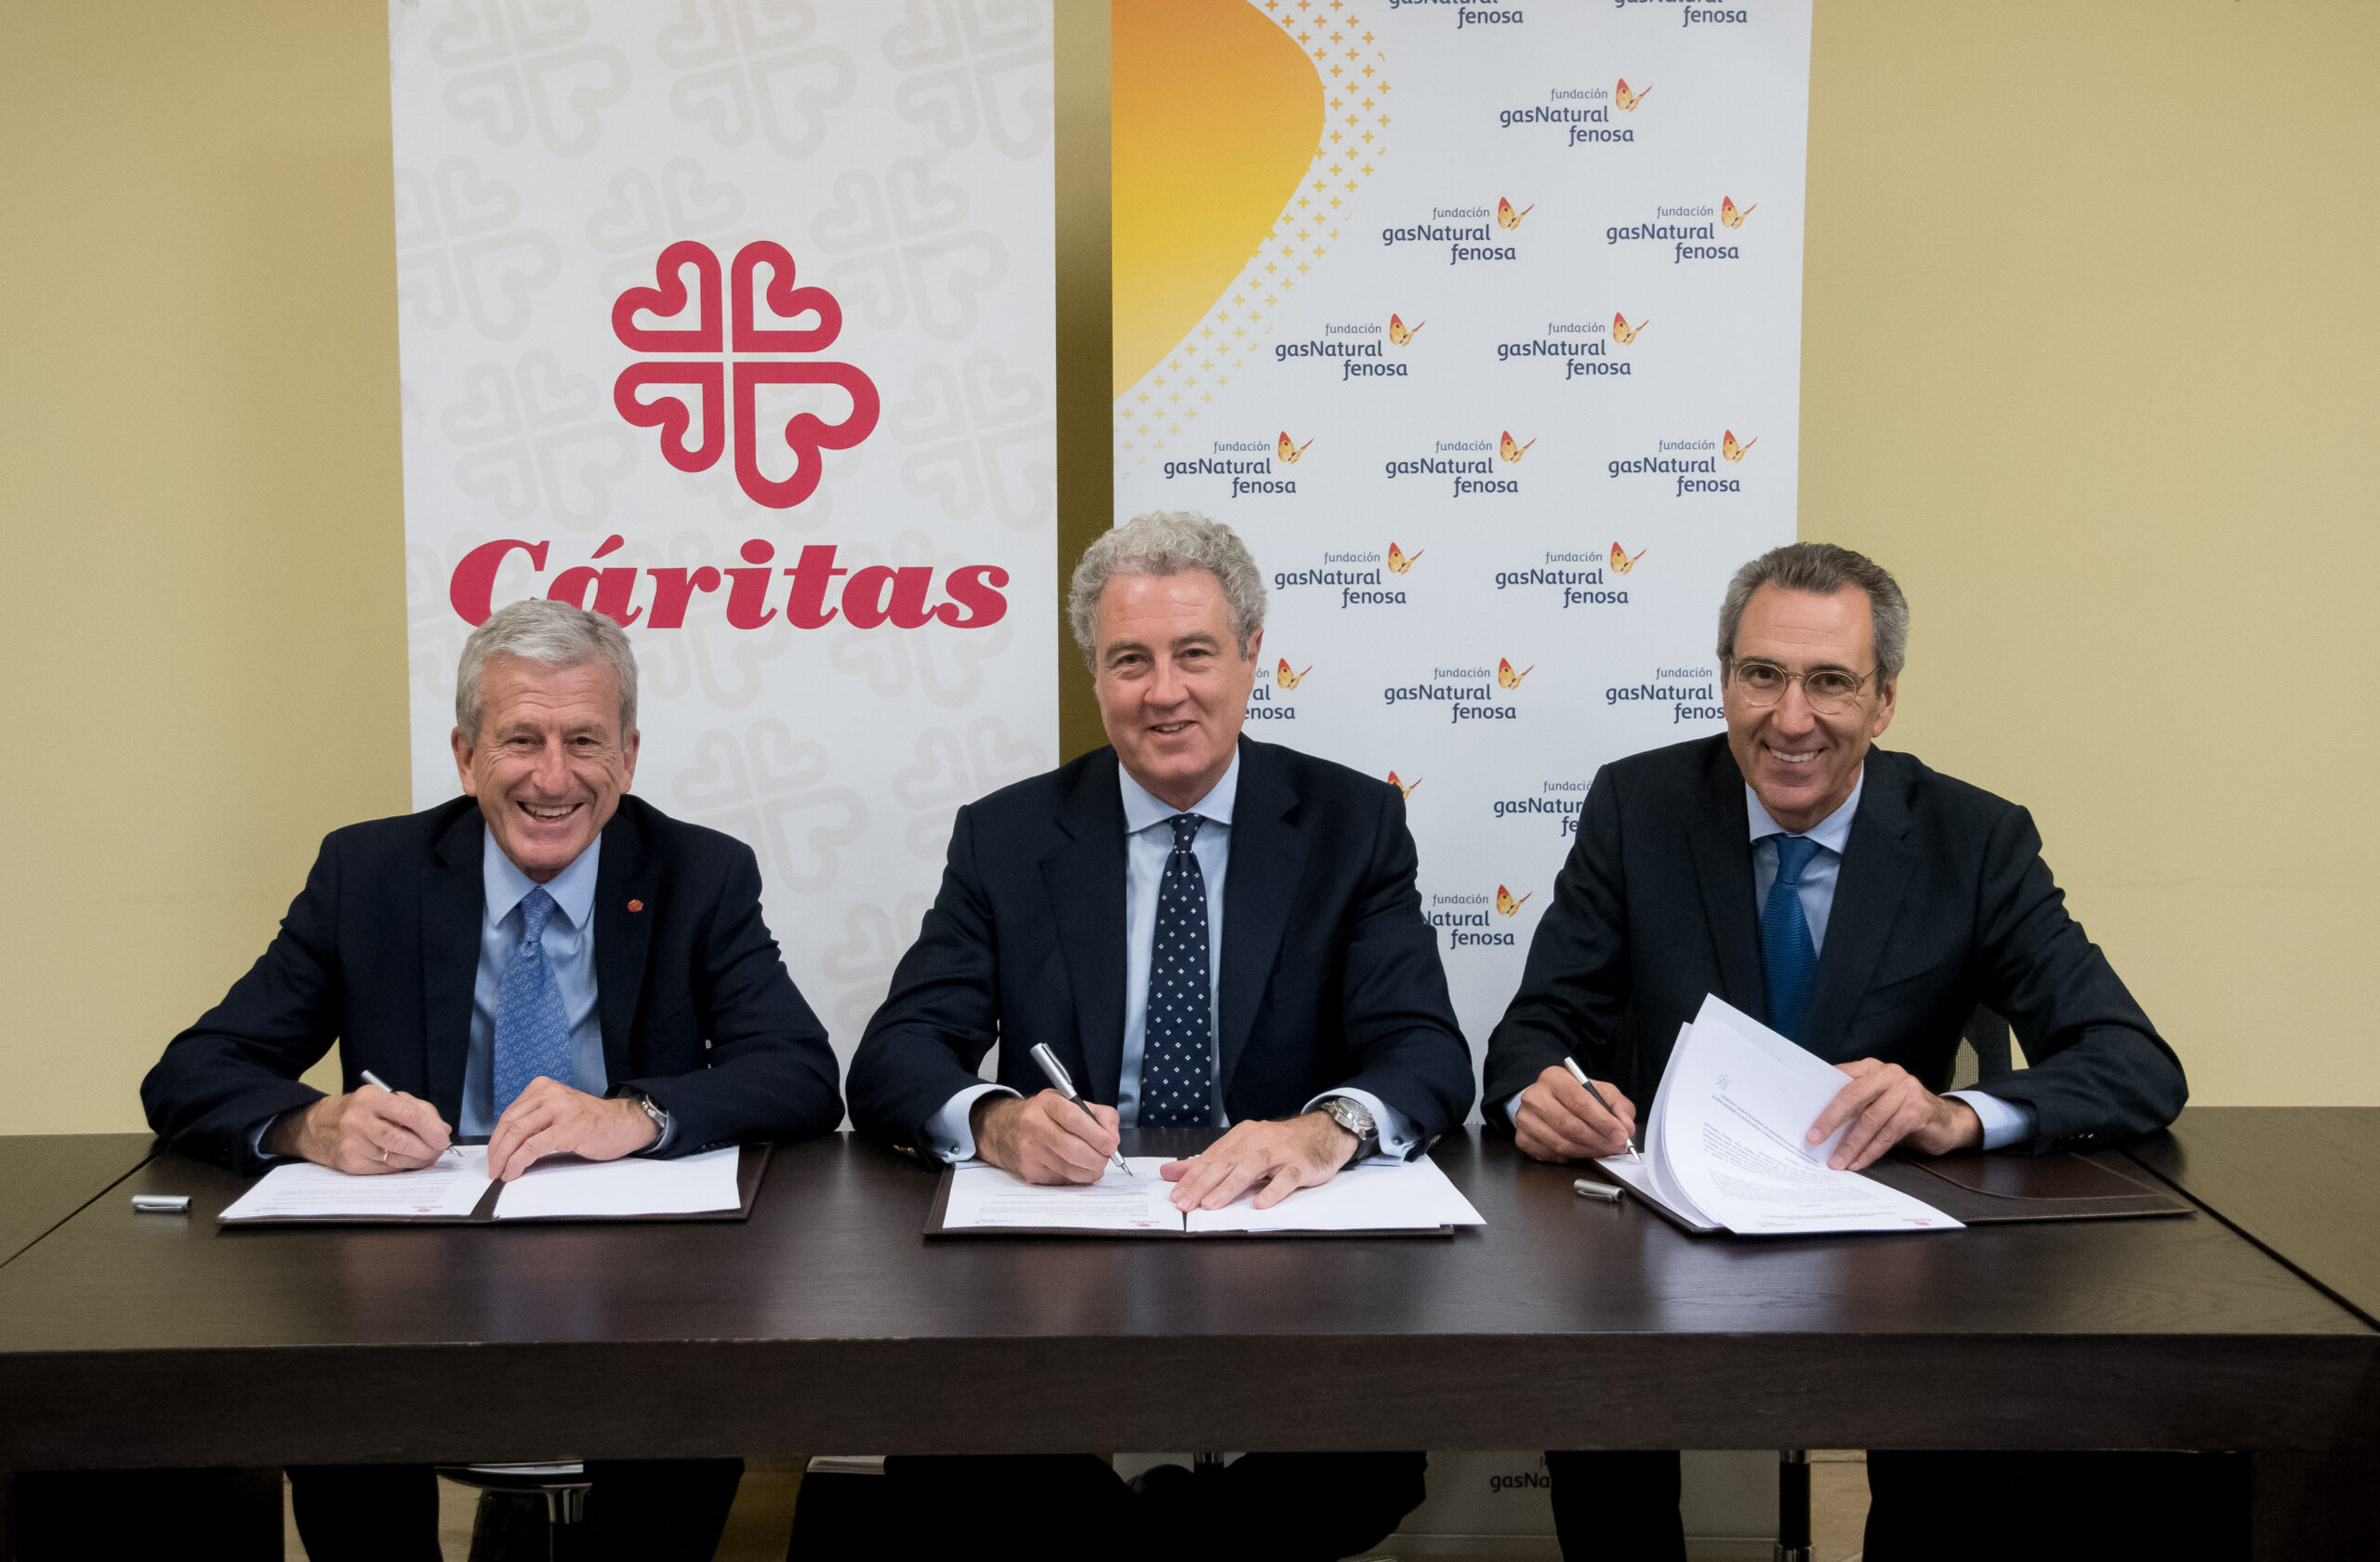 The President of Cáritas, Manuel Bretón, the General Manager of Communication and Institutional Relations of GAS NATURAL FENOSA, Jordi Garcia Tabernero, and the General Manager of the Gas Natural Fenosa Foundation, Martí Solà.